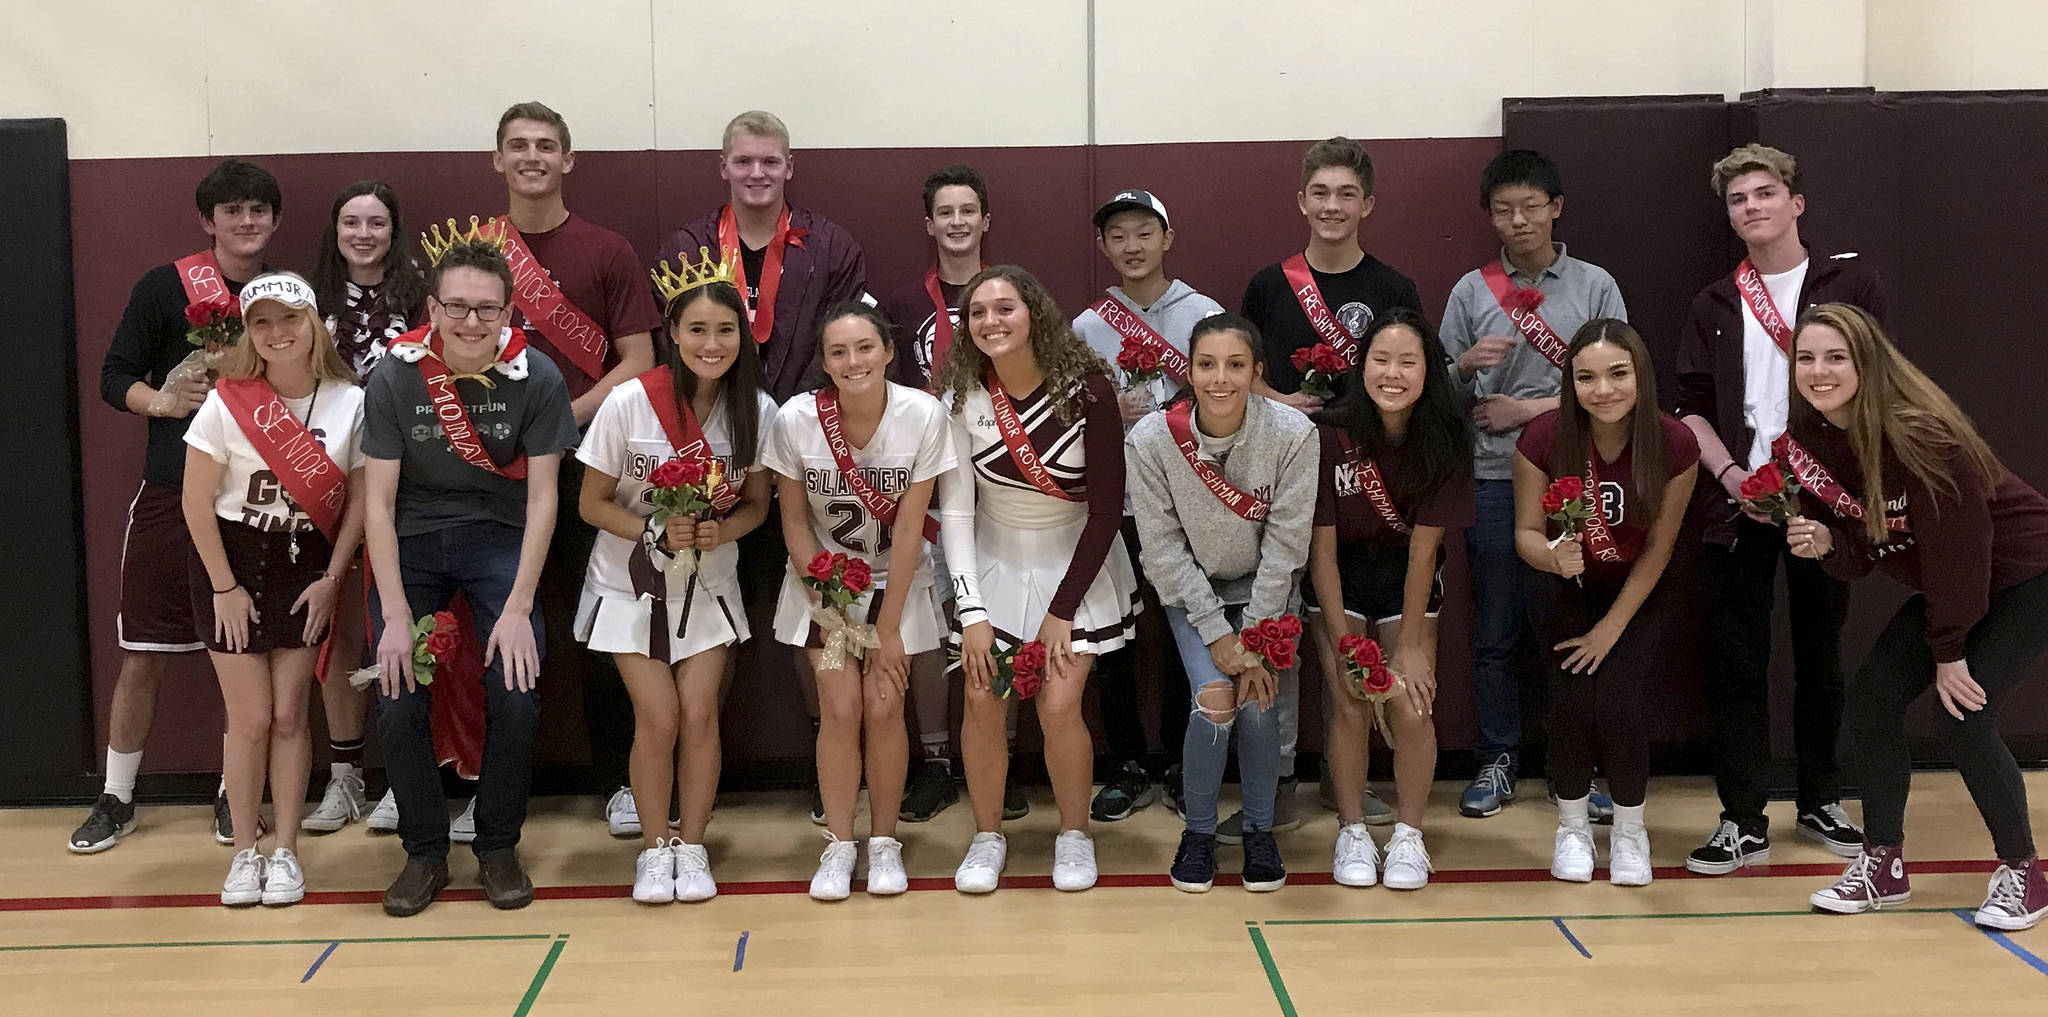 Photo courtesy of Mercer Island School District                                The 2019 Mercer Island Royalty Homecoming Court.